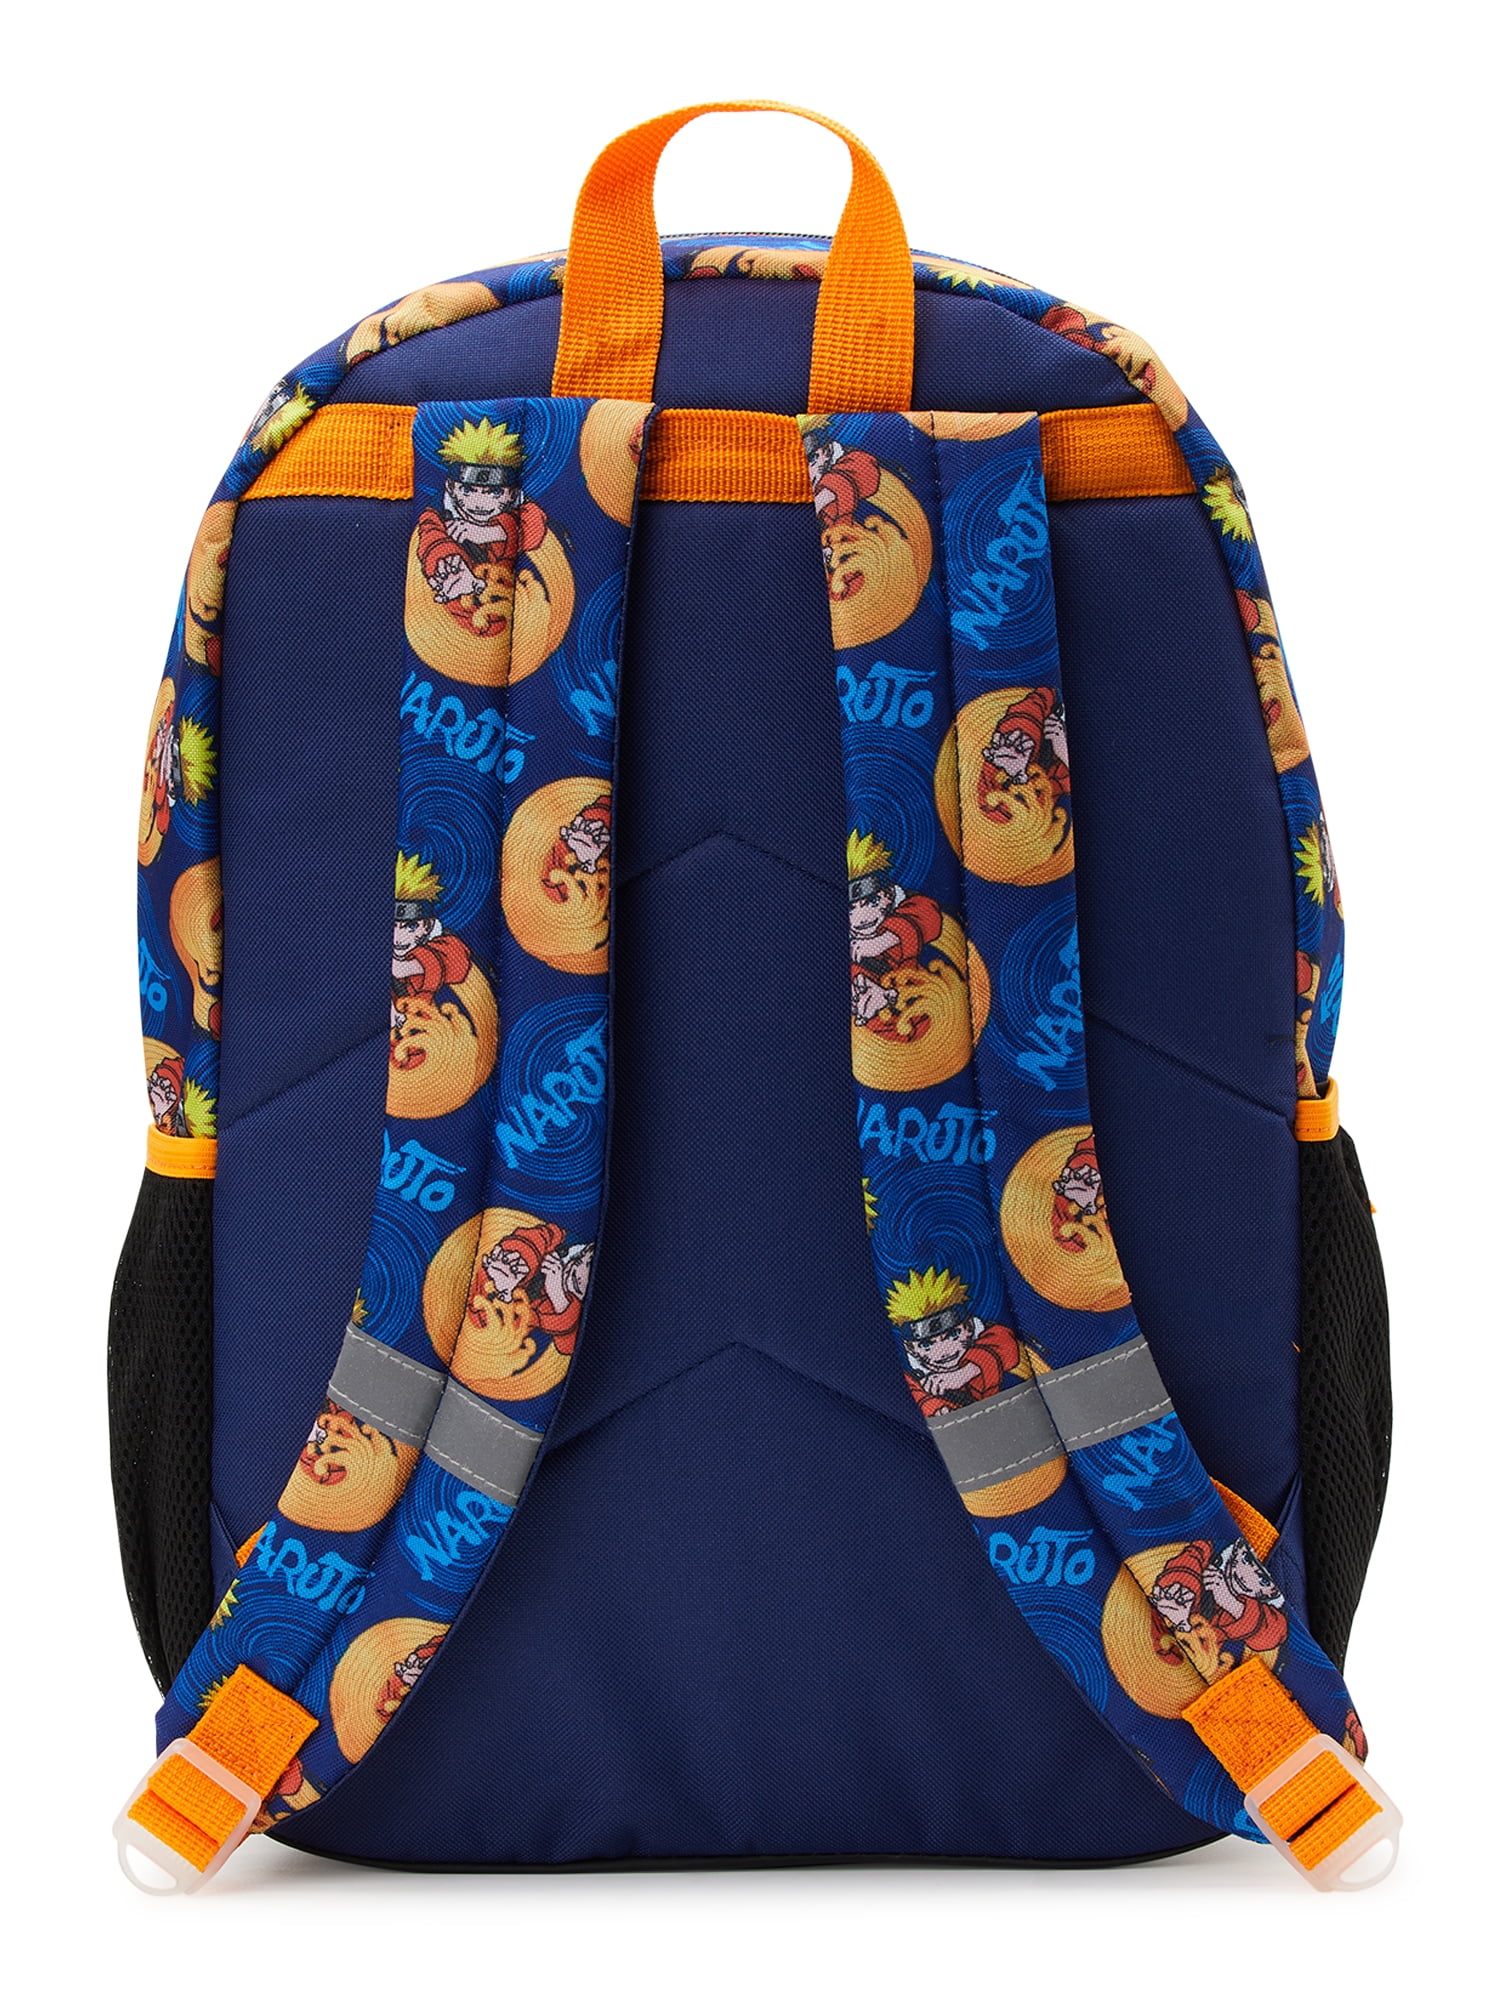 Naruto Shippuden Squad 17 inch Laptop Backpack and Lunch Bag Set, 4-Piece, Orange, Men's, Size: One Size